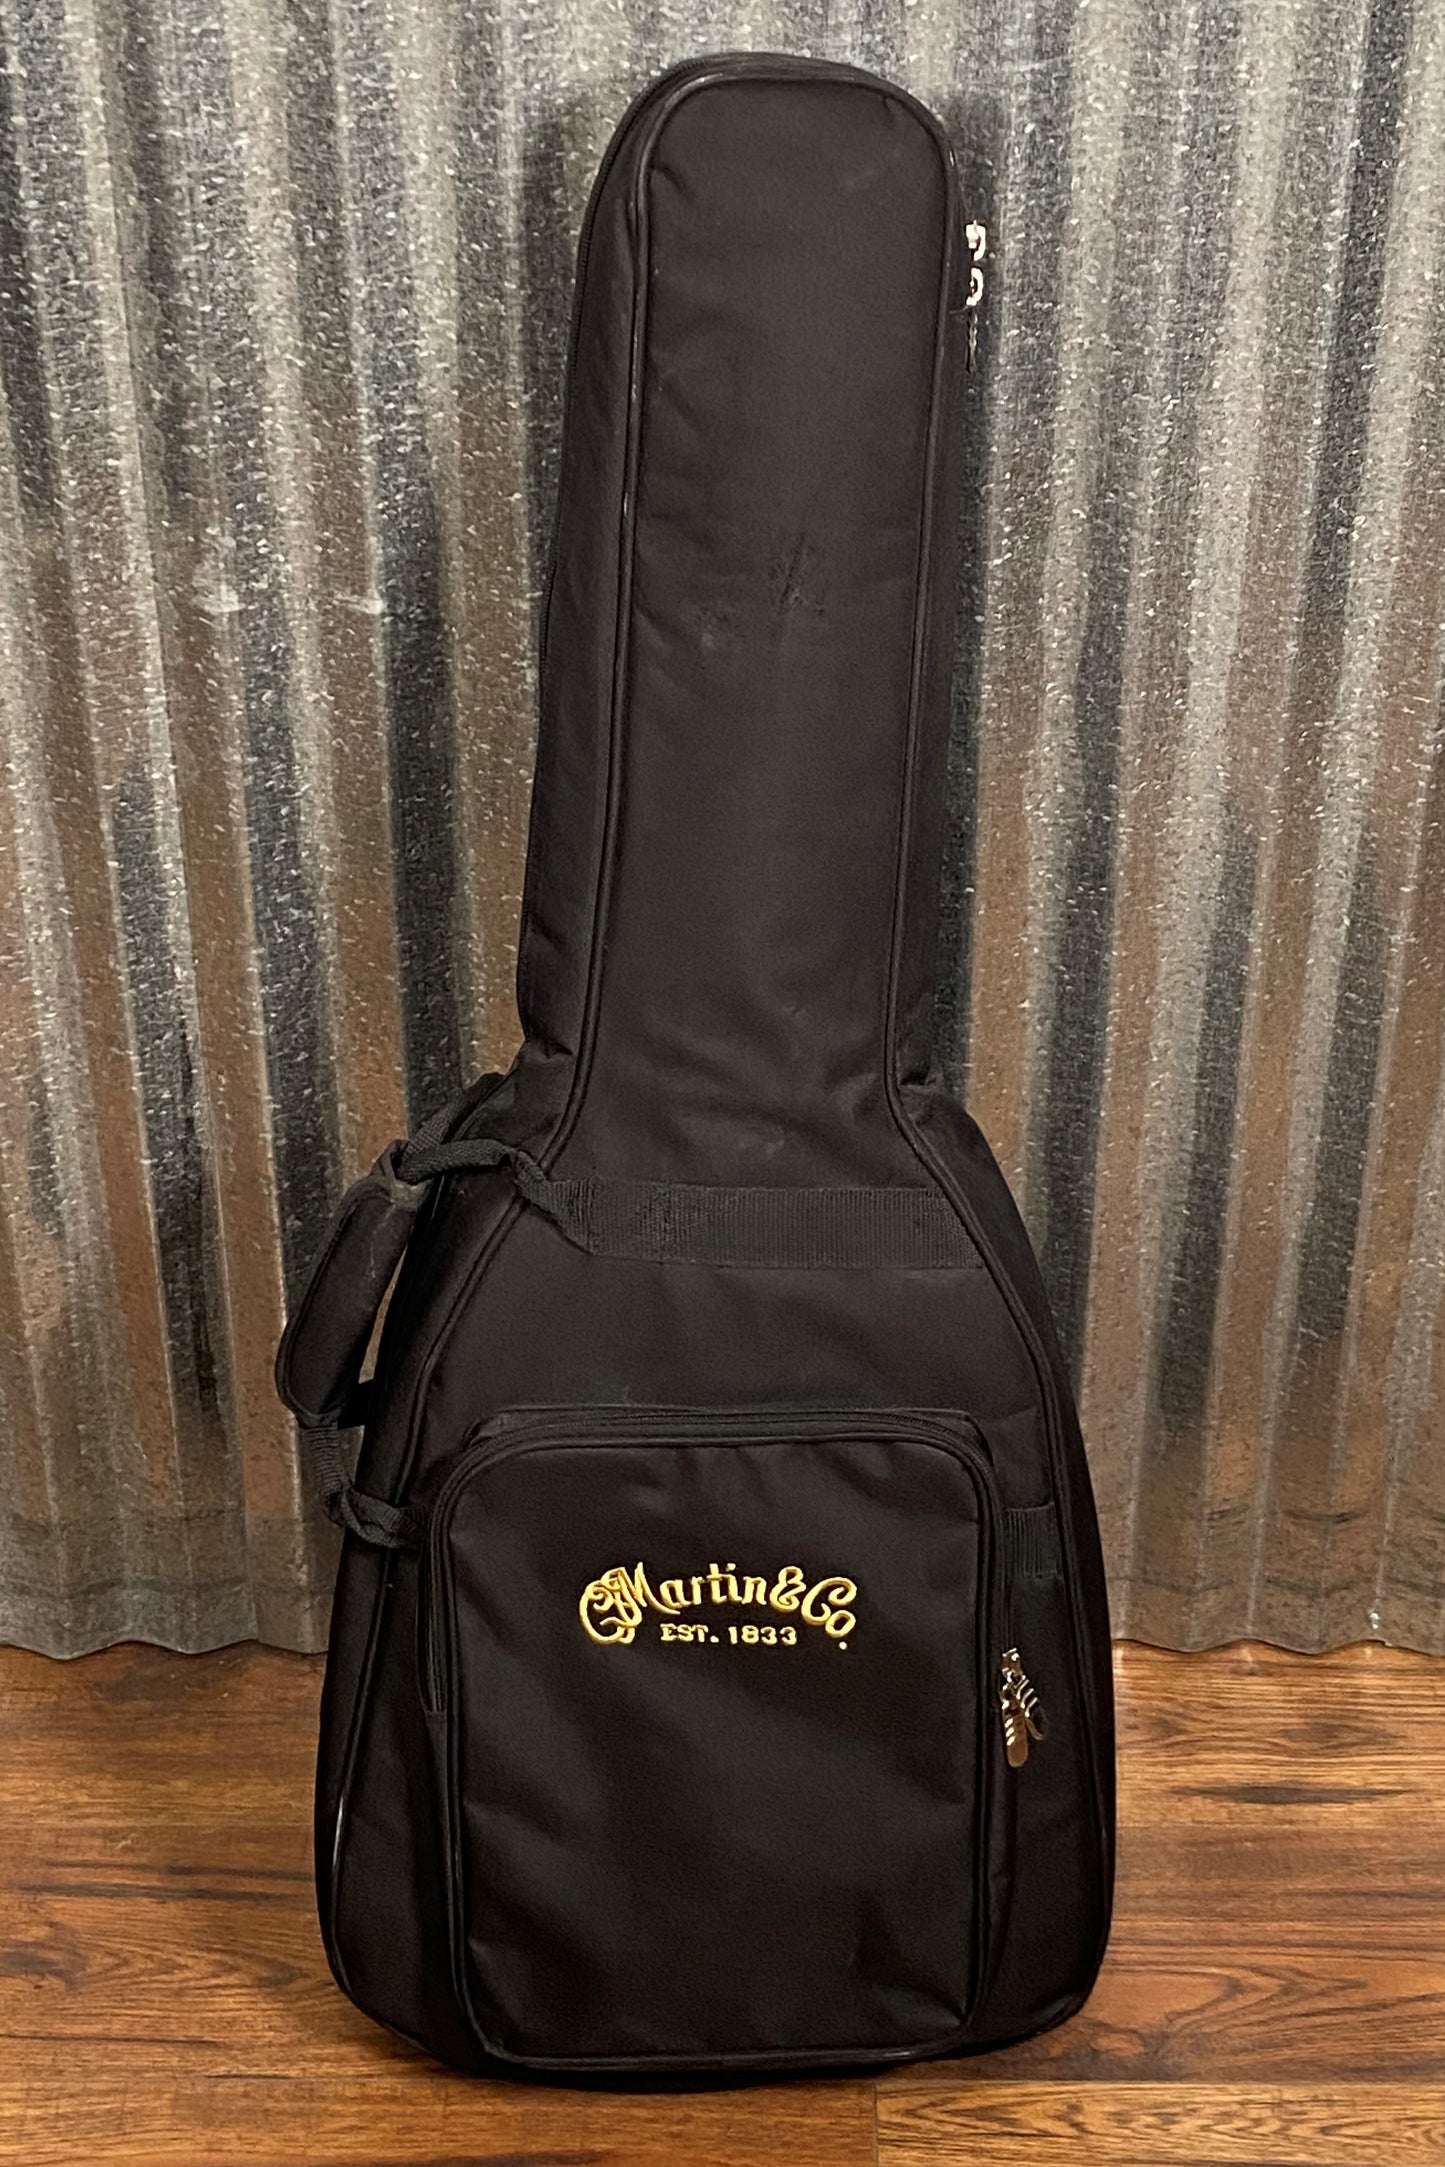 Martin LXME Little Martin Natural Acoustic Electric Travel Guitar & Bag #0787 Used